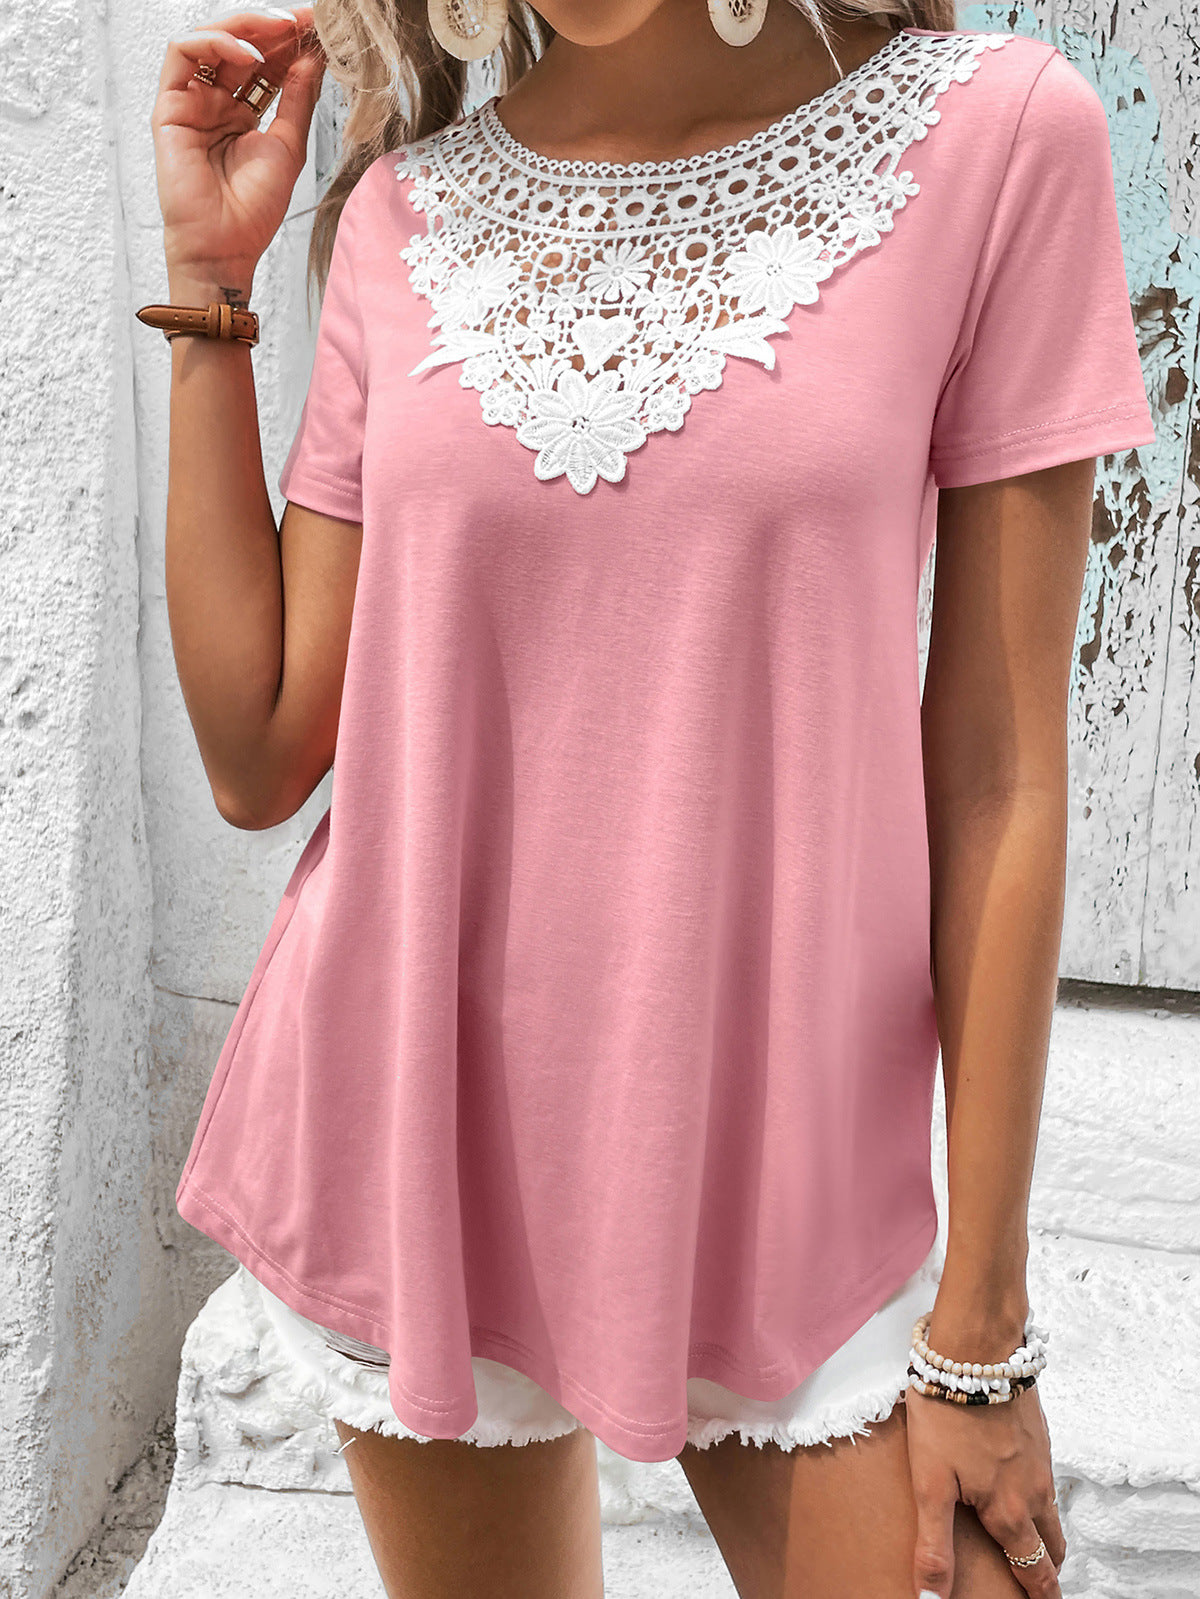 Lace-Spliced Contrast Short Sleeve Top Carnation Pink